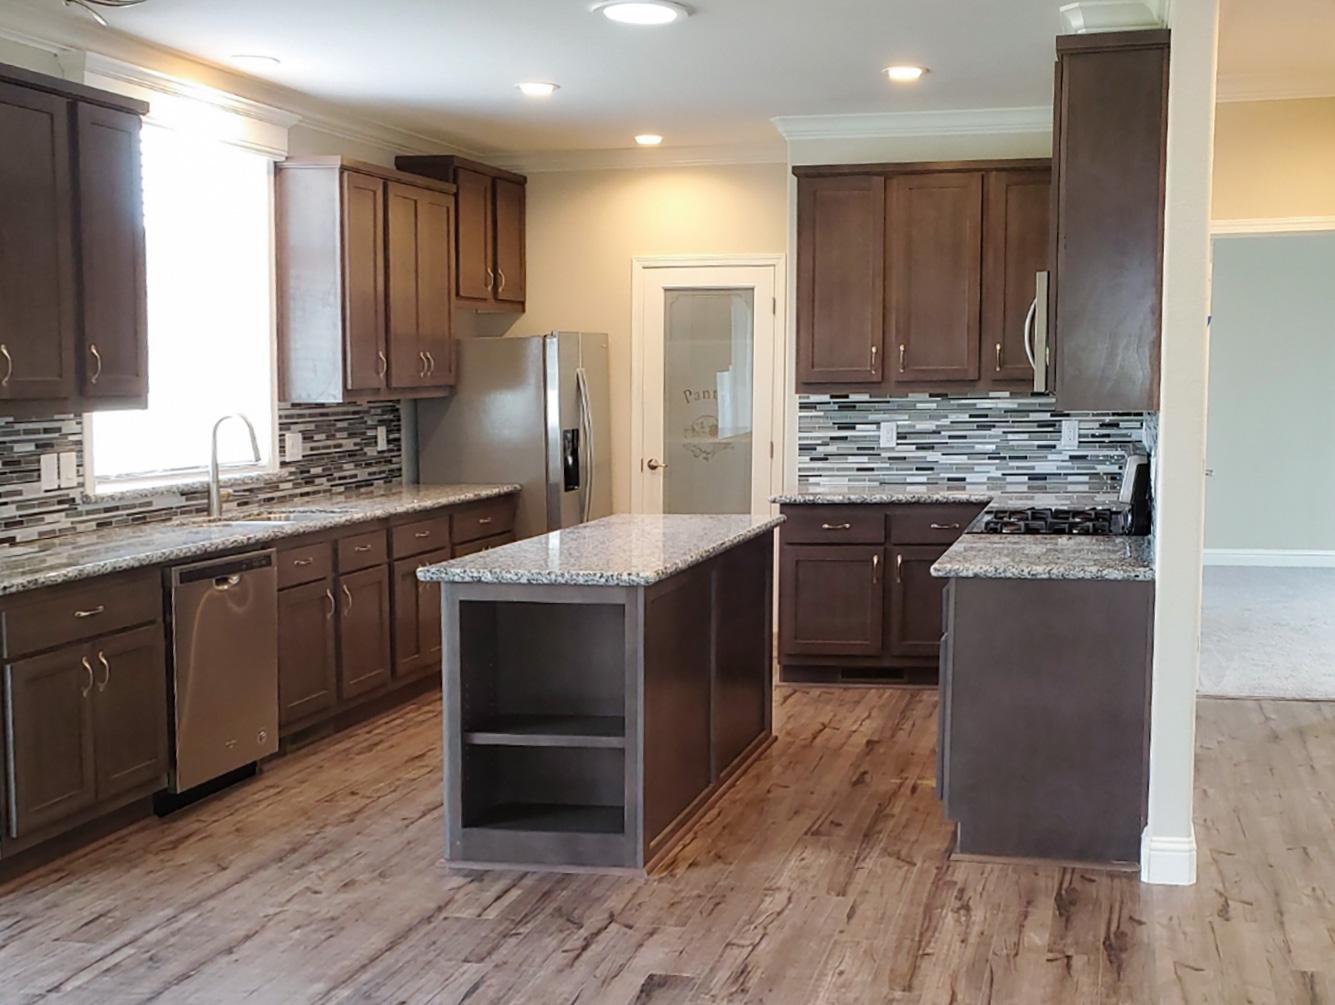 Picture of This kitchen remodeling project in Santa Rosa features new flooring and recessed lighting. - J A Serrano Construction